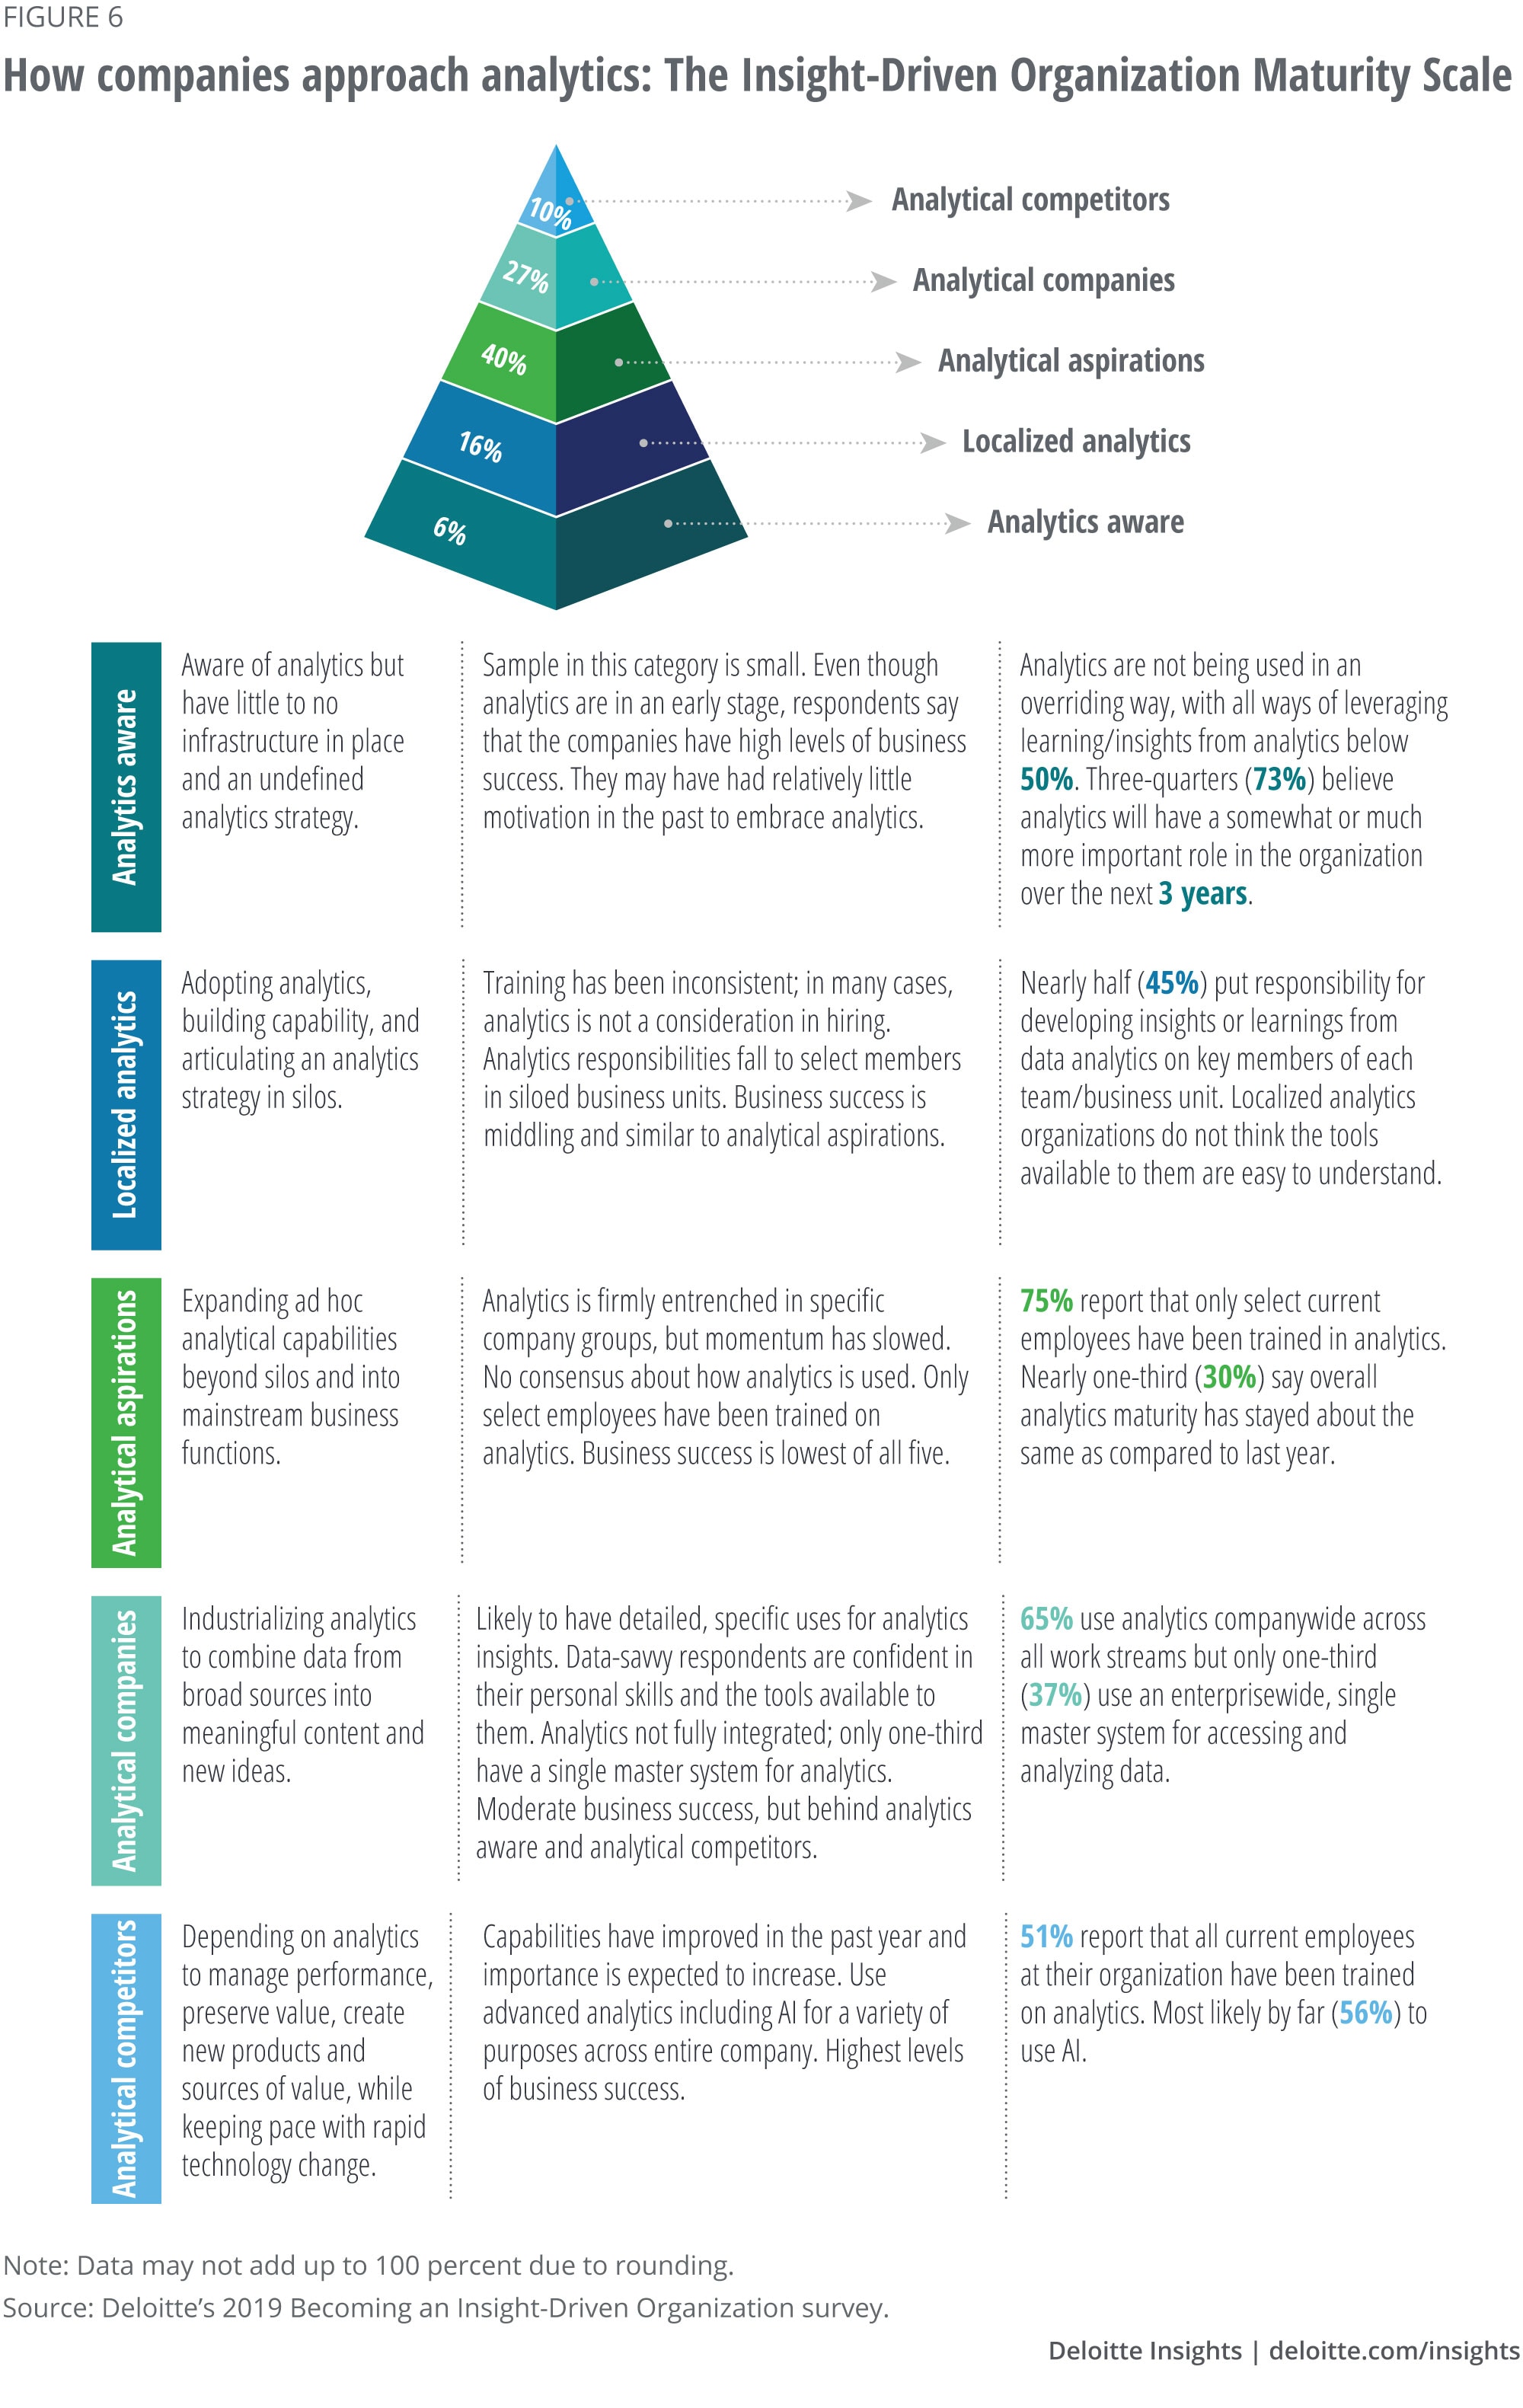 How companies approach analytics: The Insight-Driven Organization Maturity Scale